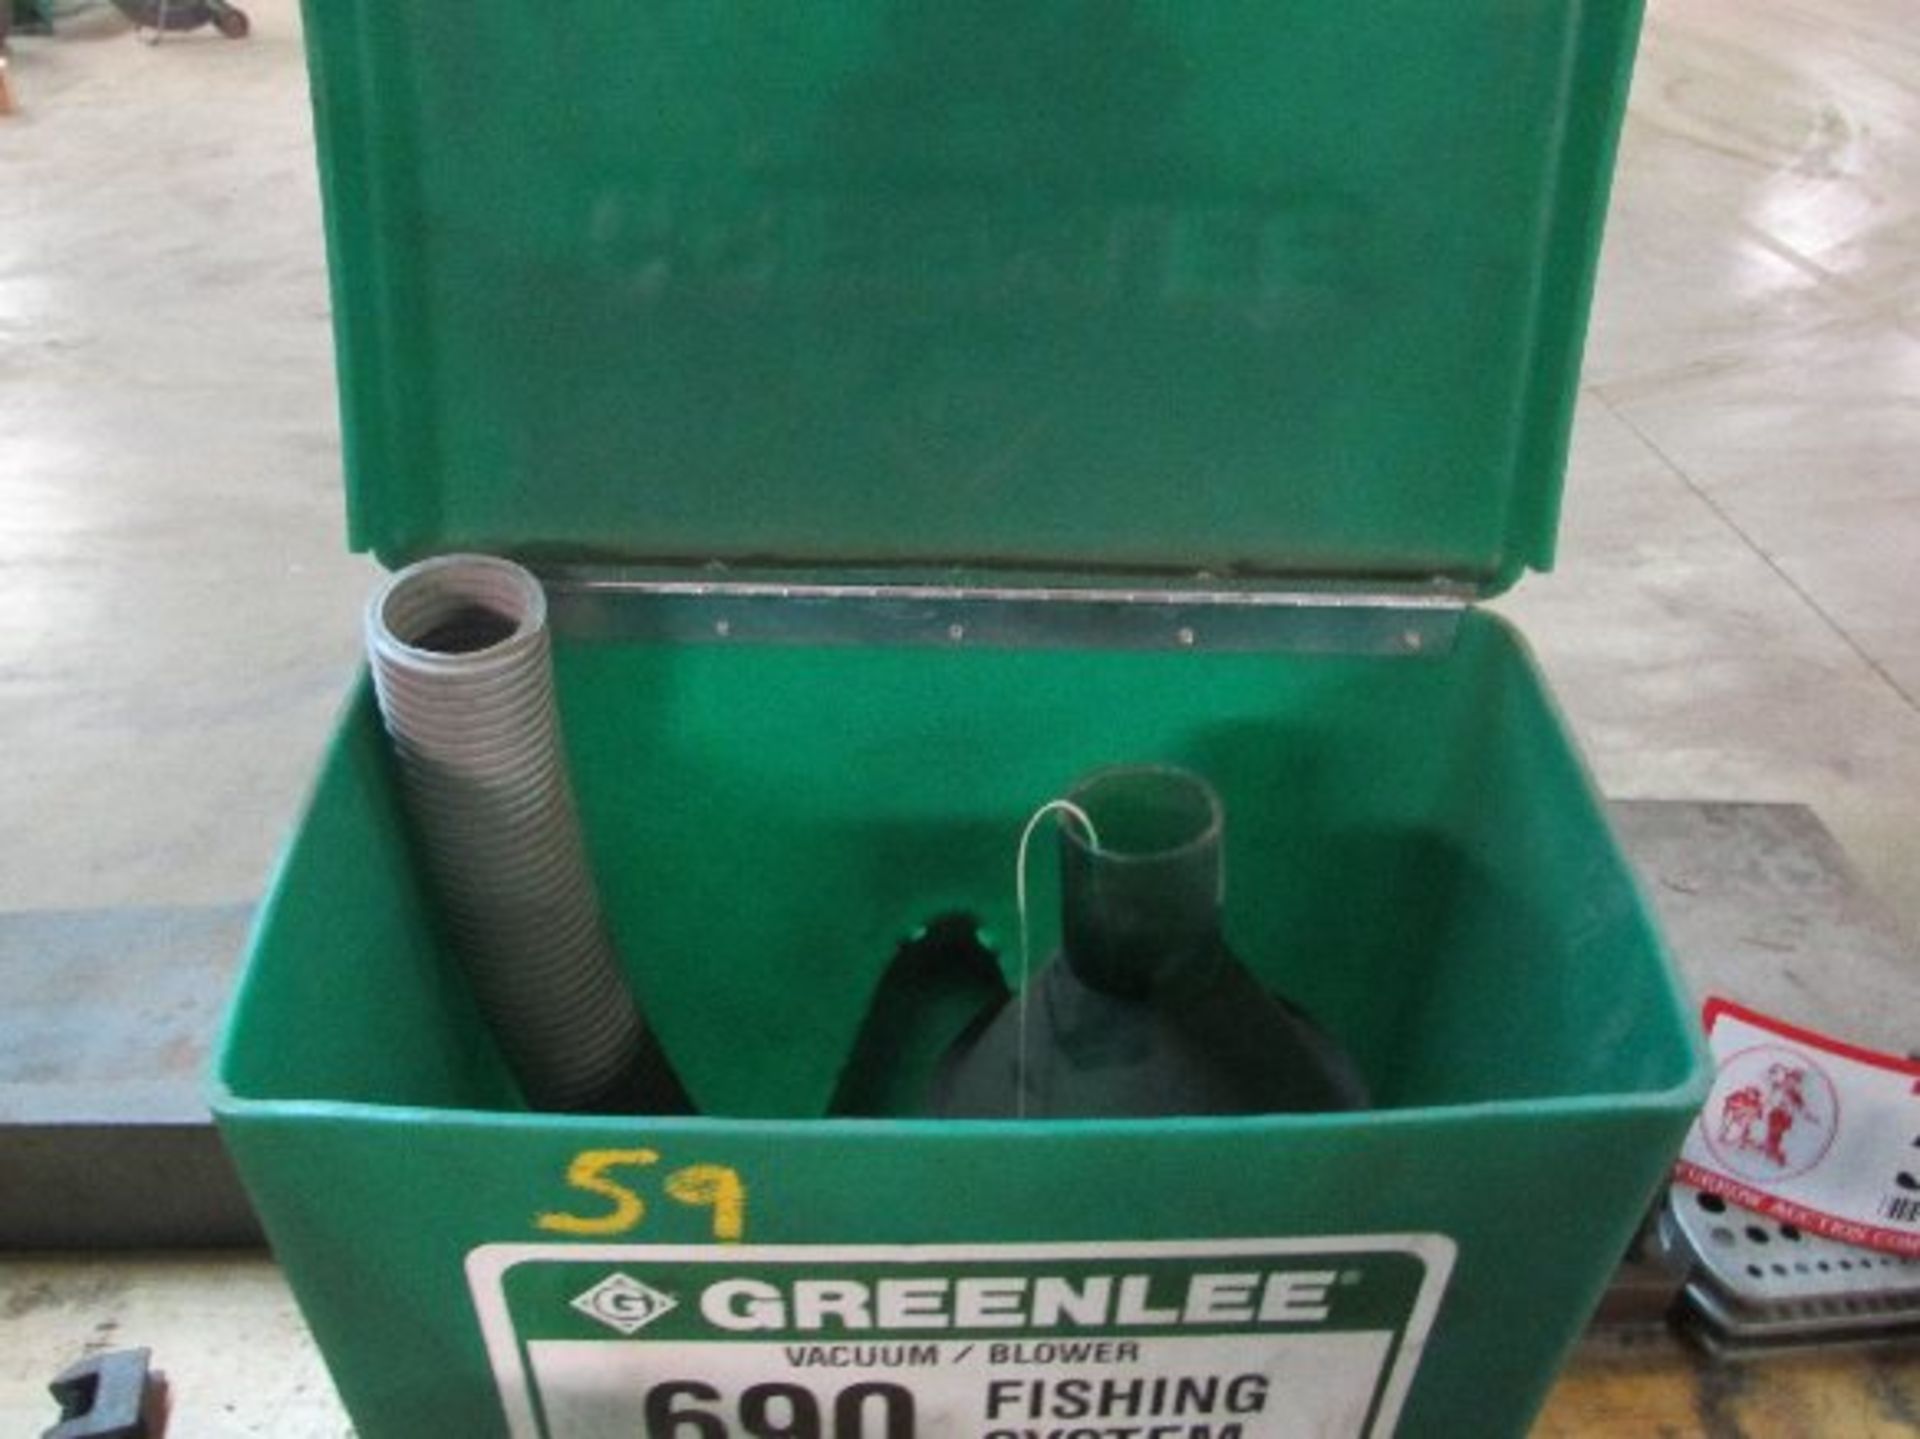 Greenlee Mdl 690 Fishing System, Backend/Blower